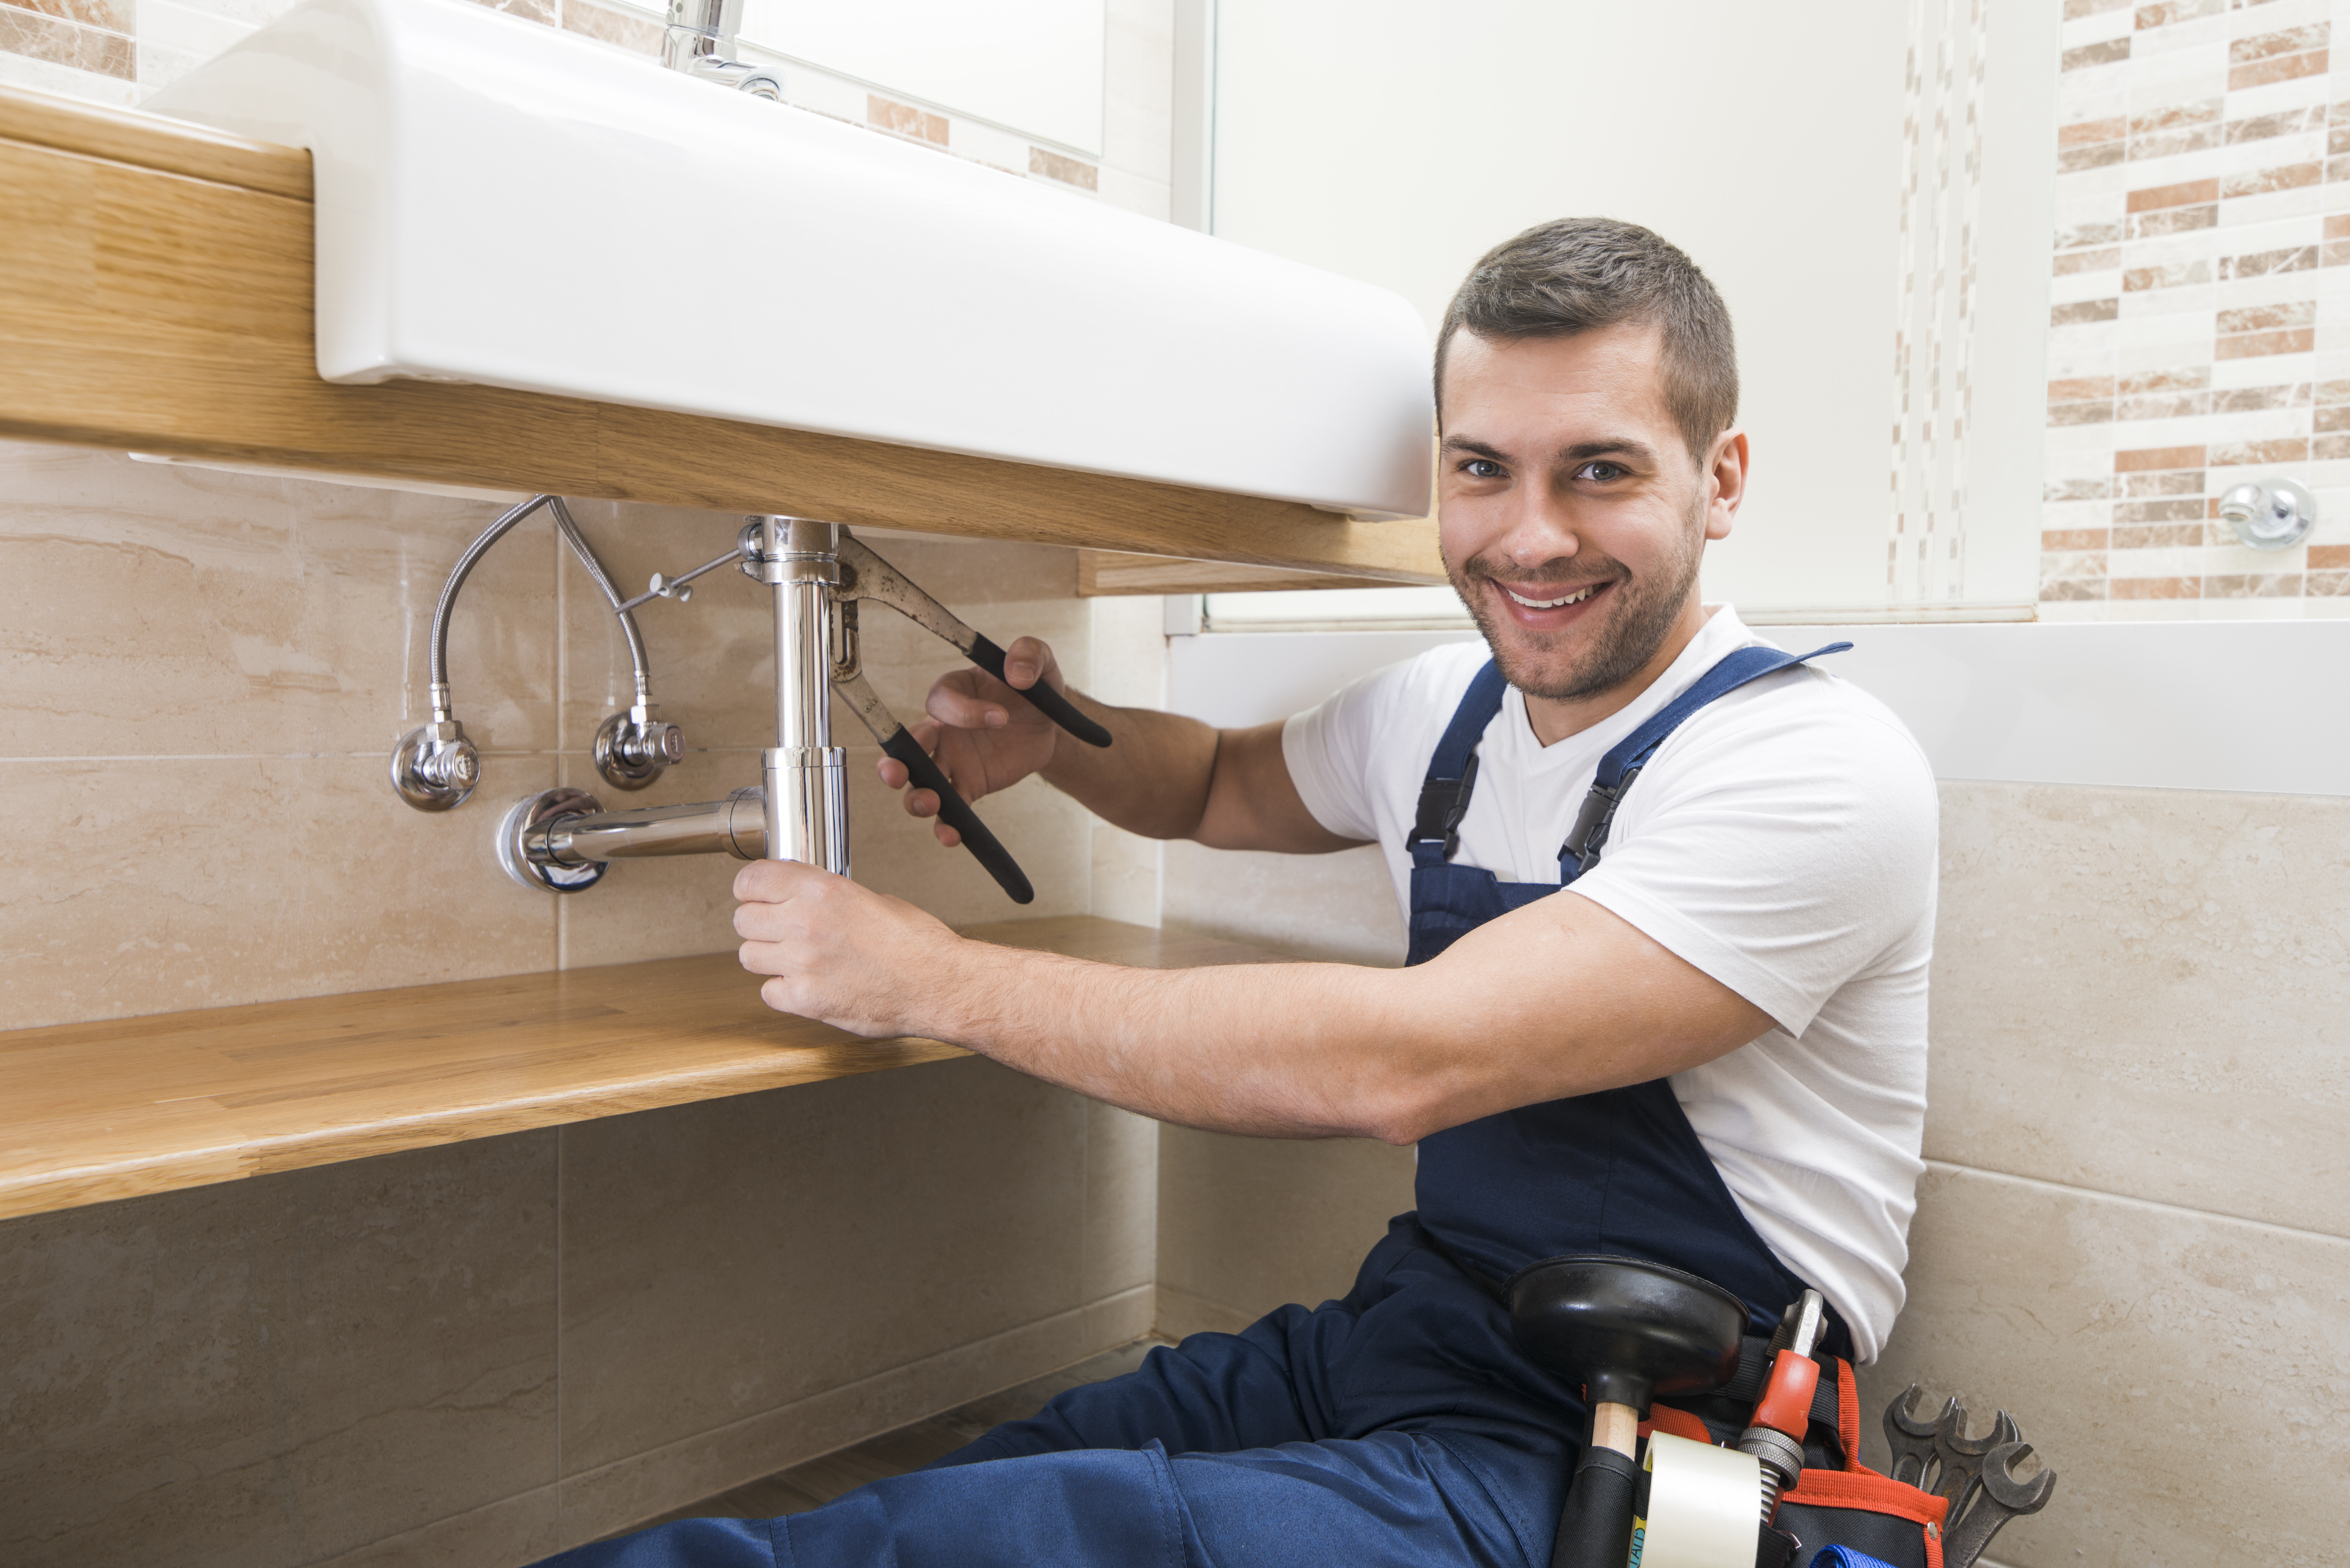 A Top-Rated Plumbing Contractor in The Hamilton Region is wearing a white shirt and blue coveralls is shown sitting parallel to a sink drain.  He is holding a valve stem in one hand and a set of pliers in the other while working on hooking up the drain.